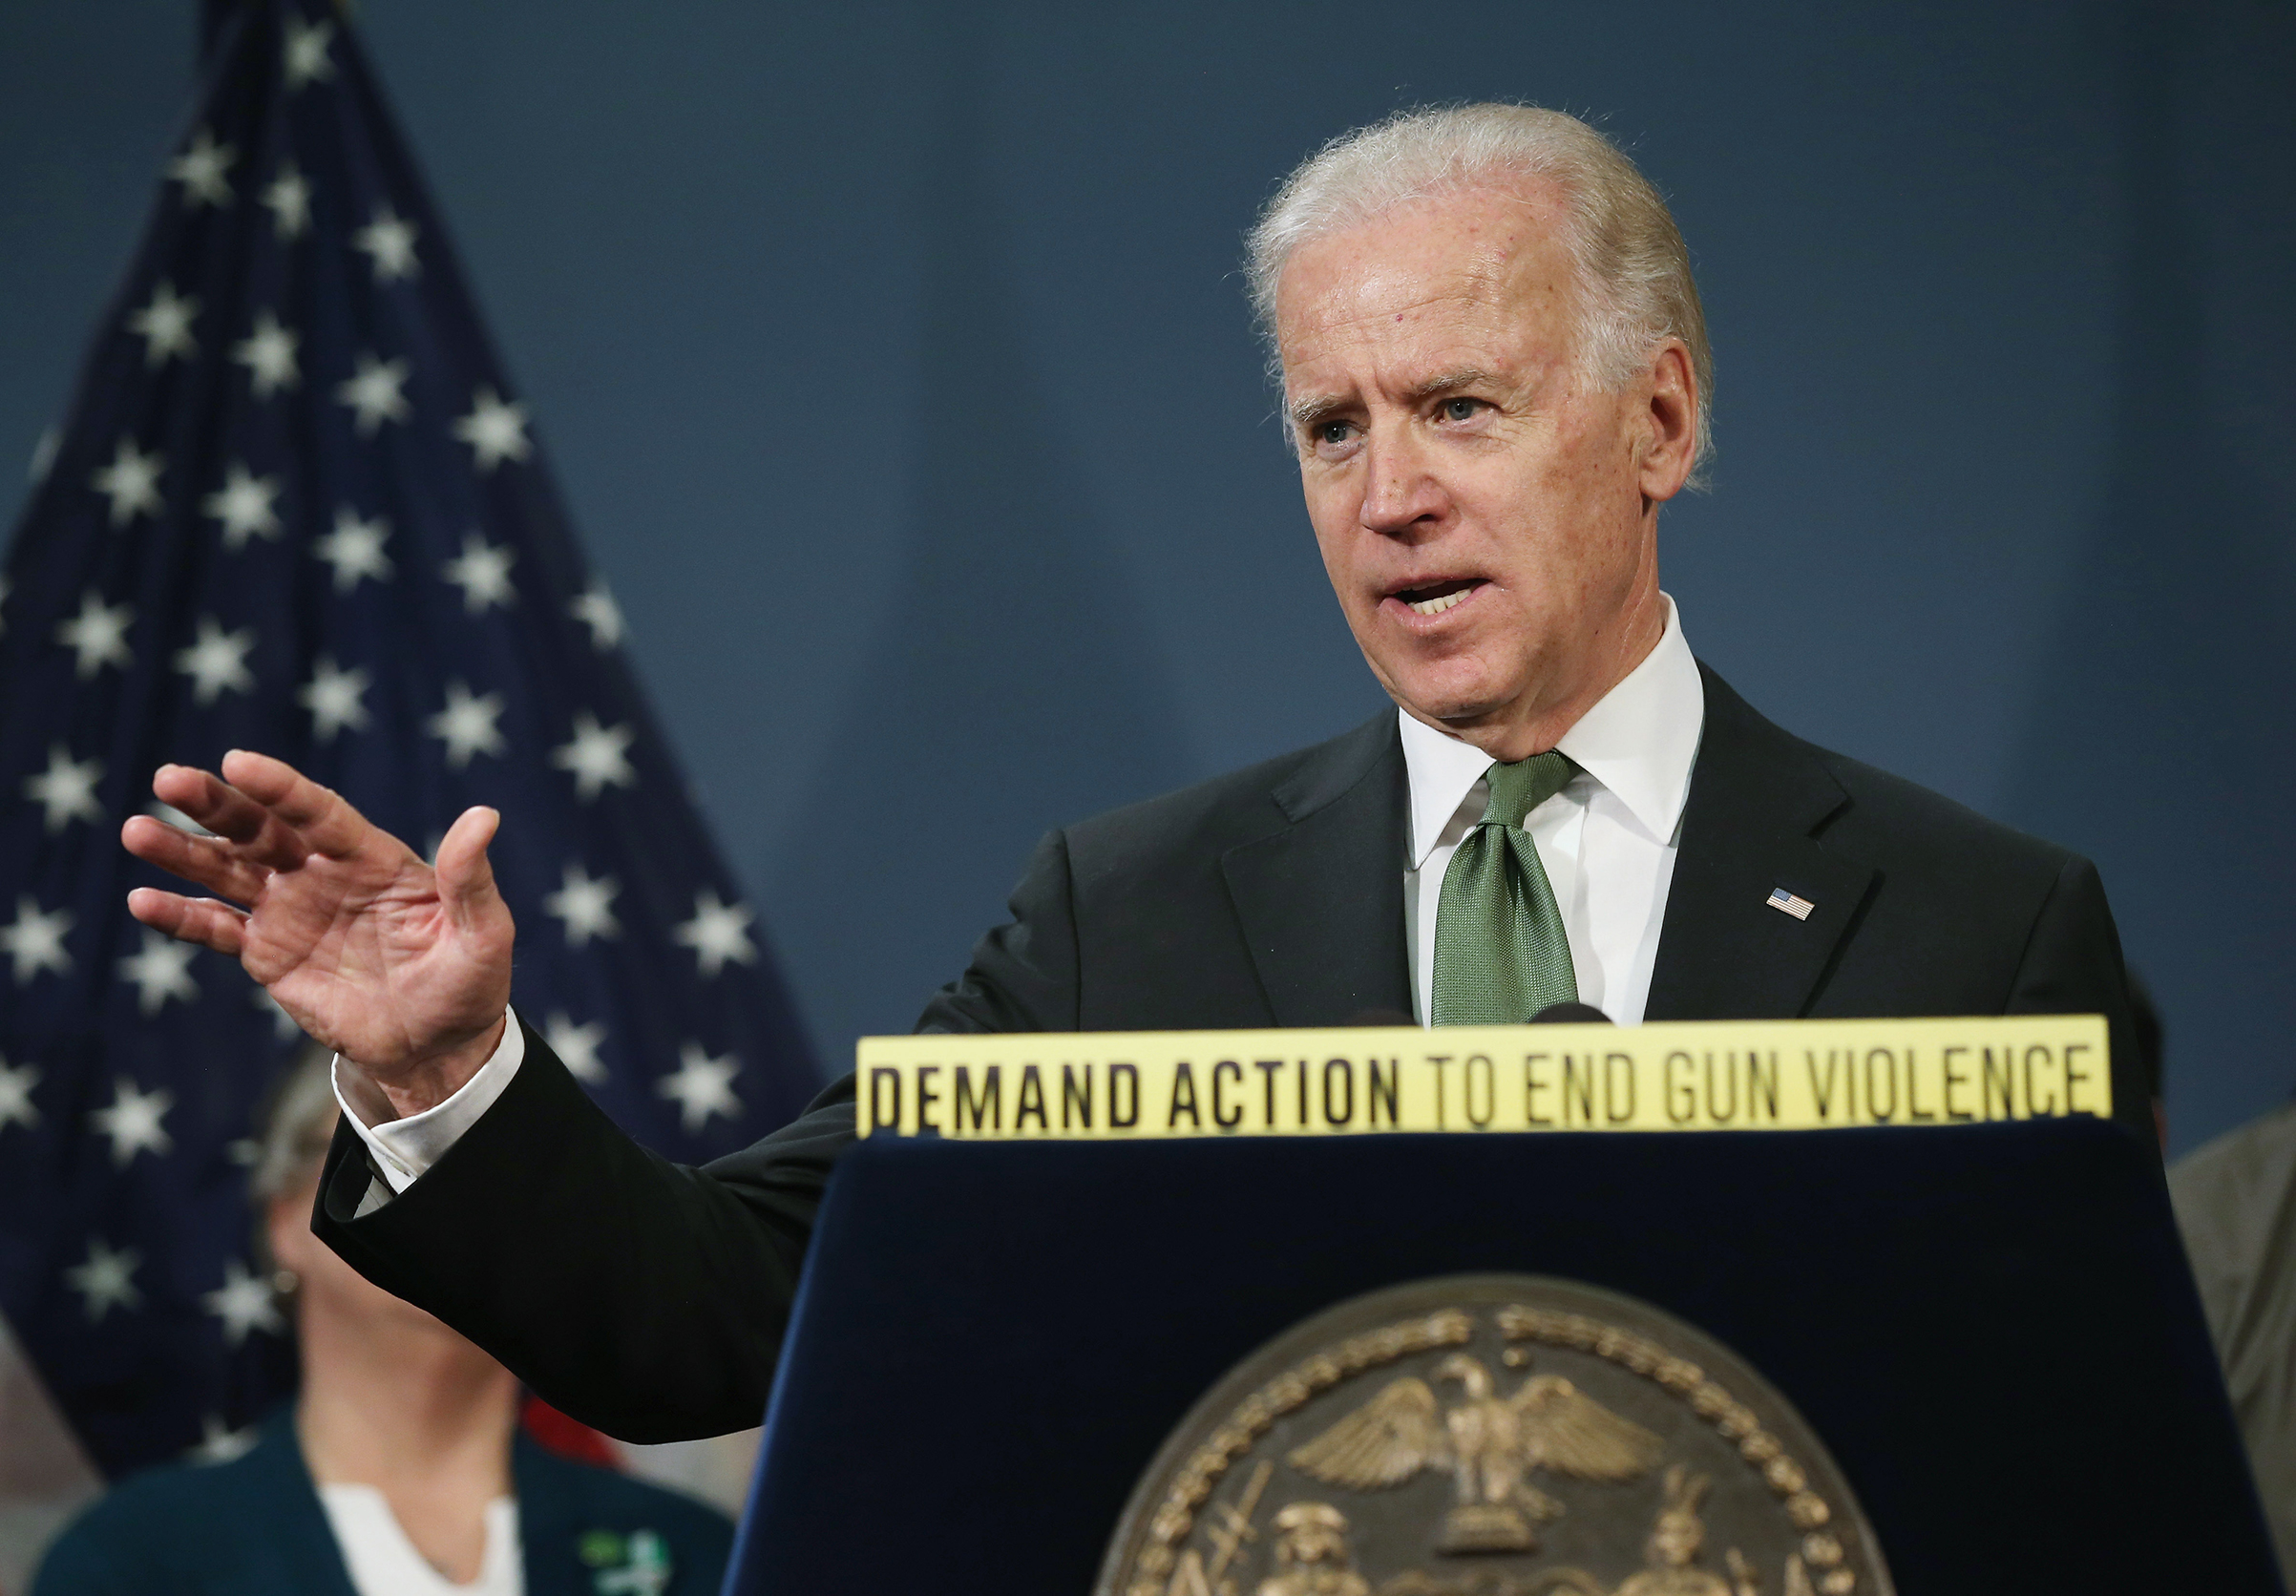 Former Vice President Joe Biden speaks in favor of gun reform legislation at a press conference with family members of Sandy Hook shooting victims on March 21, 2013 in New York City. (John Moore—Getty Images)